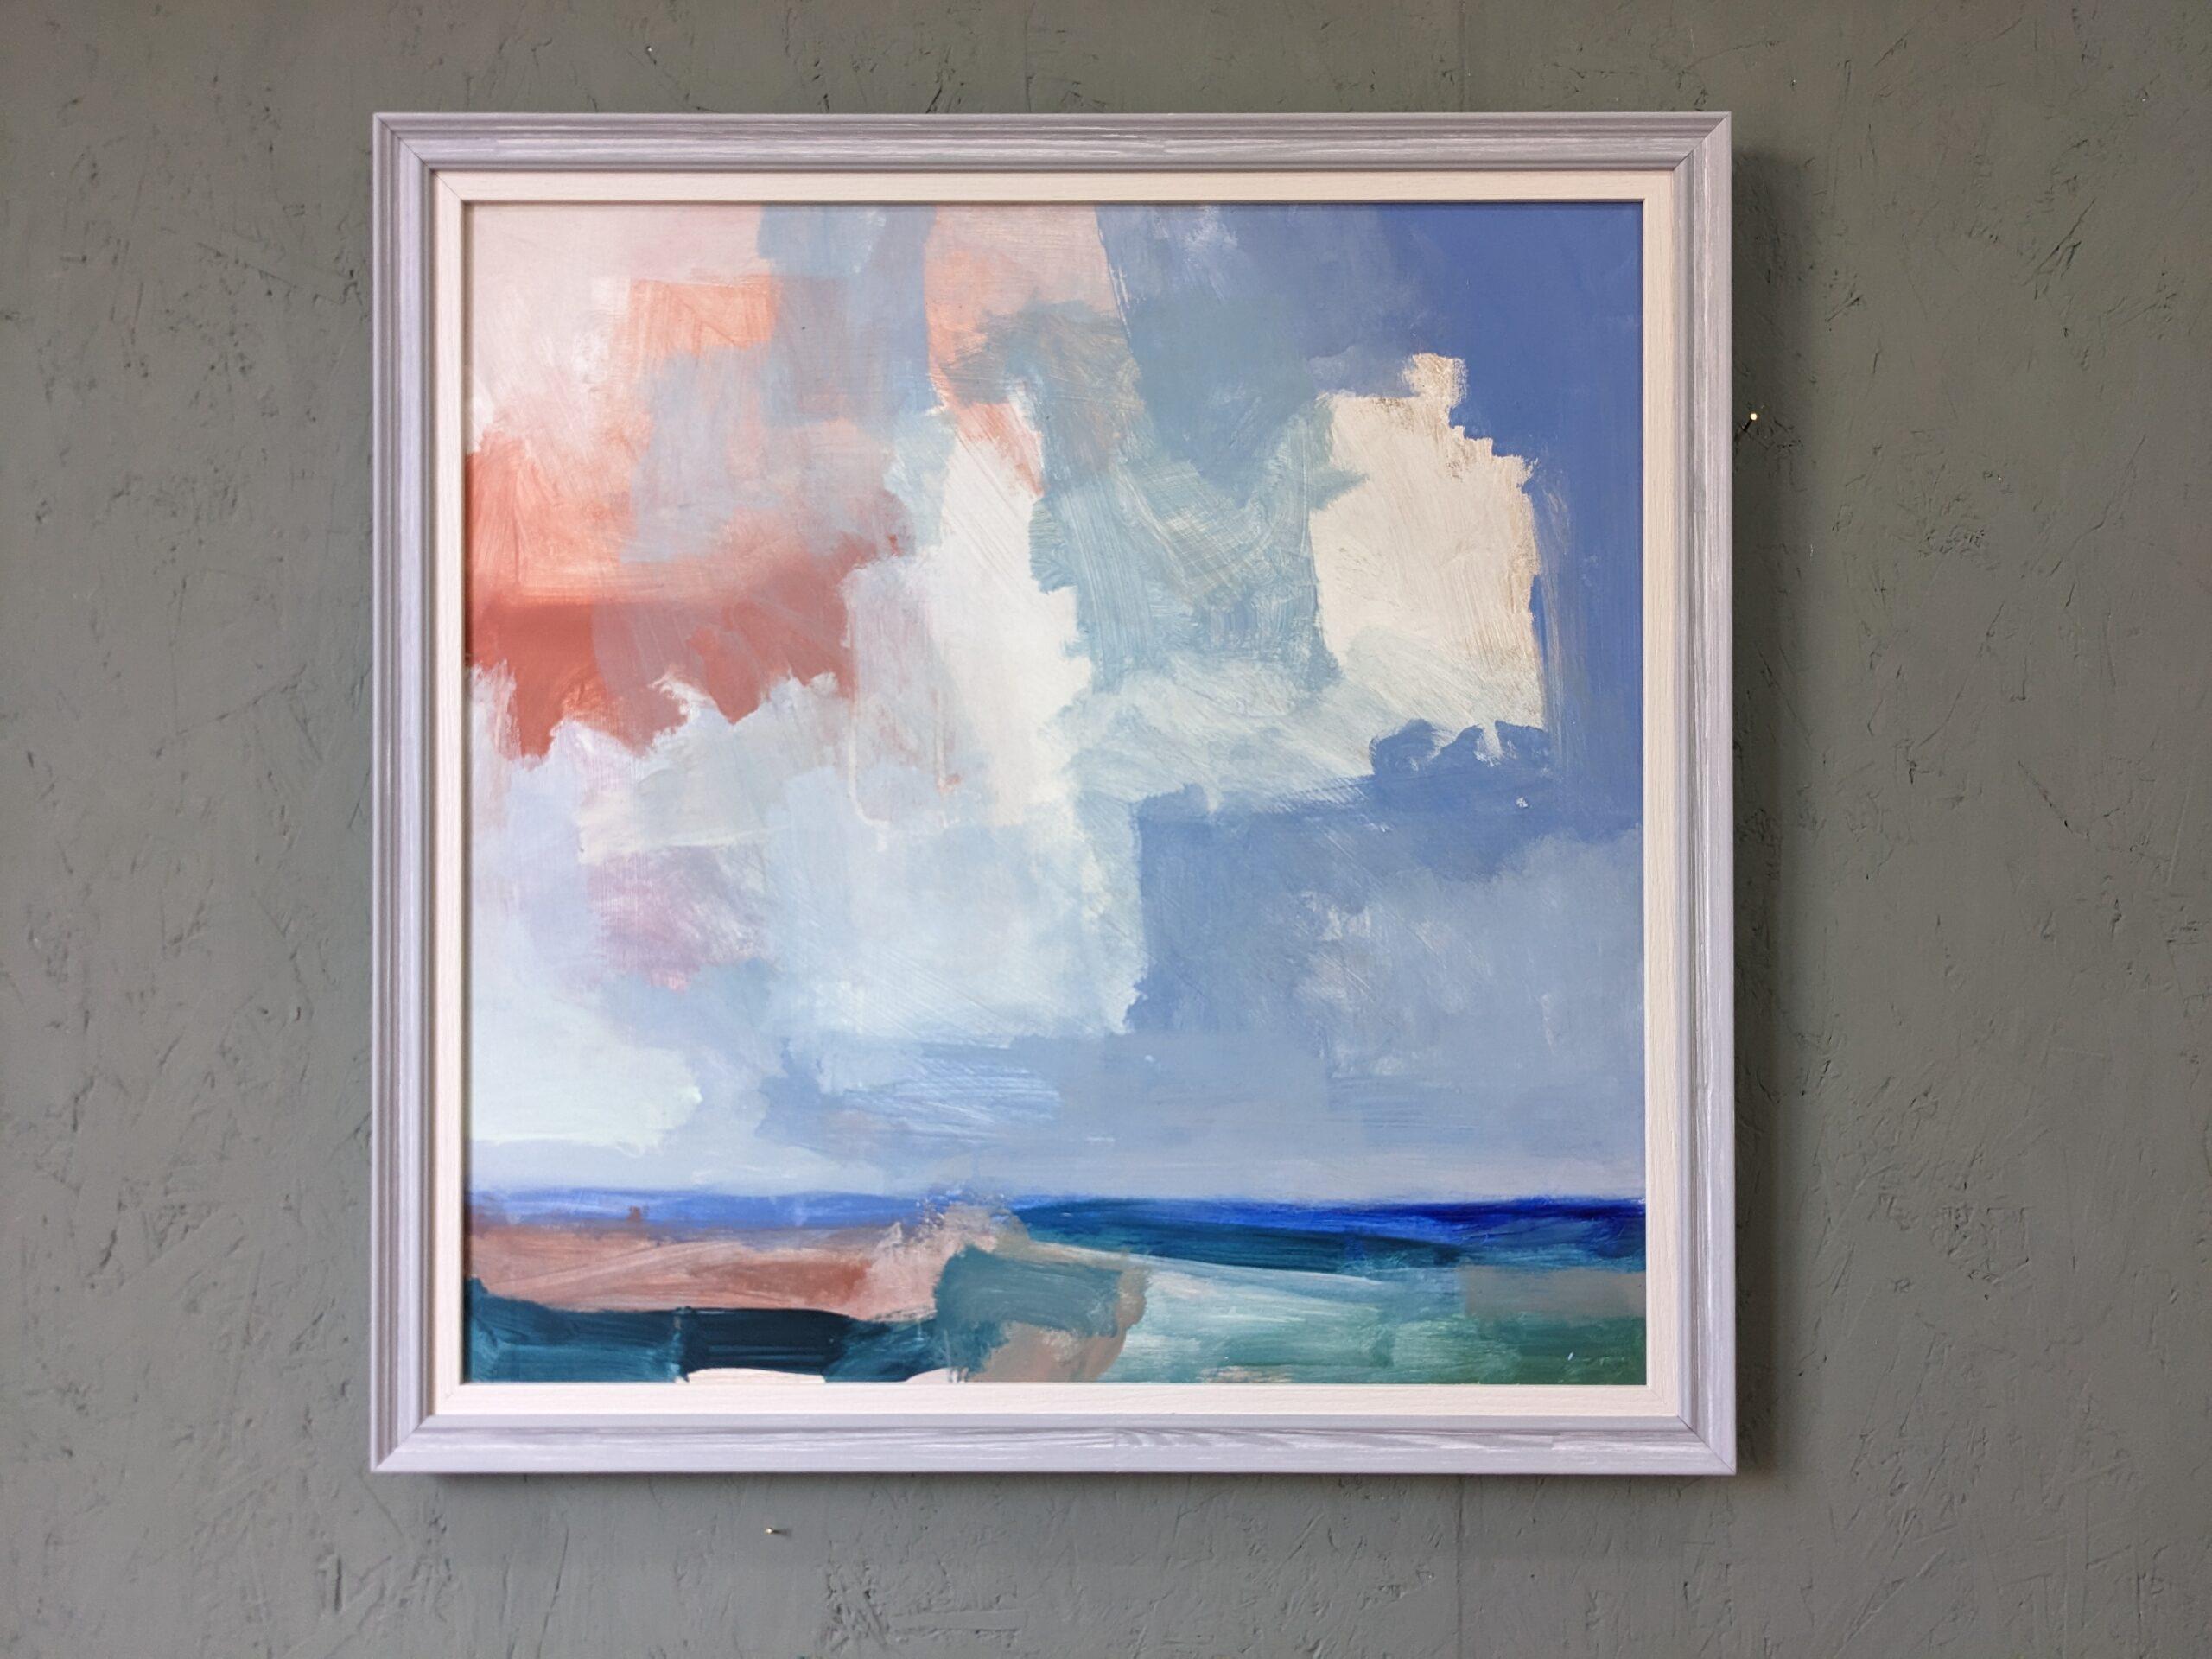 SUMMER CLOUDS
Size: 65.5 x 65.5 cm (including frame)
Oil on board

An outstanding and atmospheric abstract coastal scape painting, executed in oil onto board by contemporary British artist Ian Mood.

The vast expanse of a magnificent sky dominates